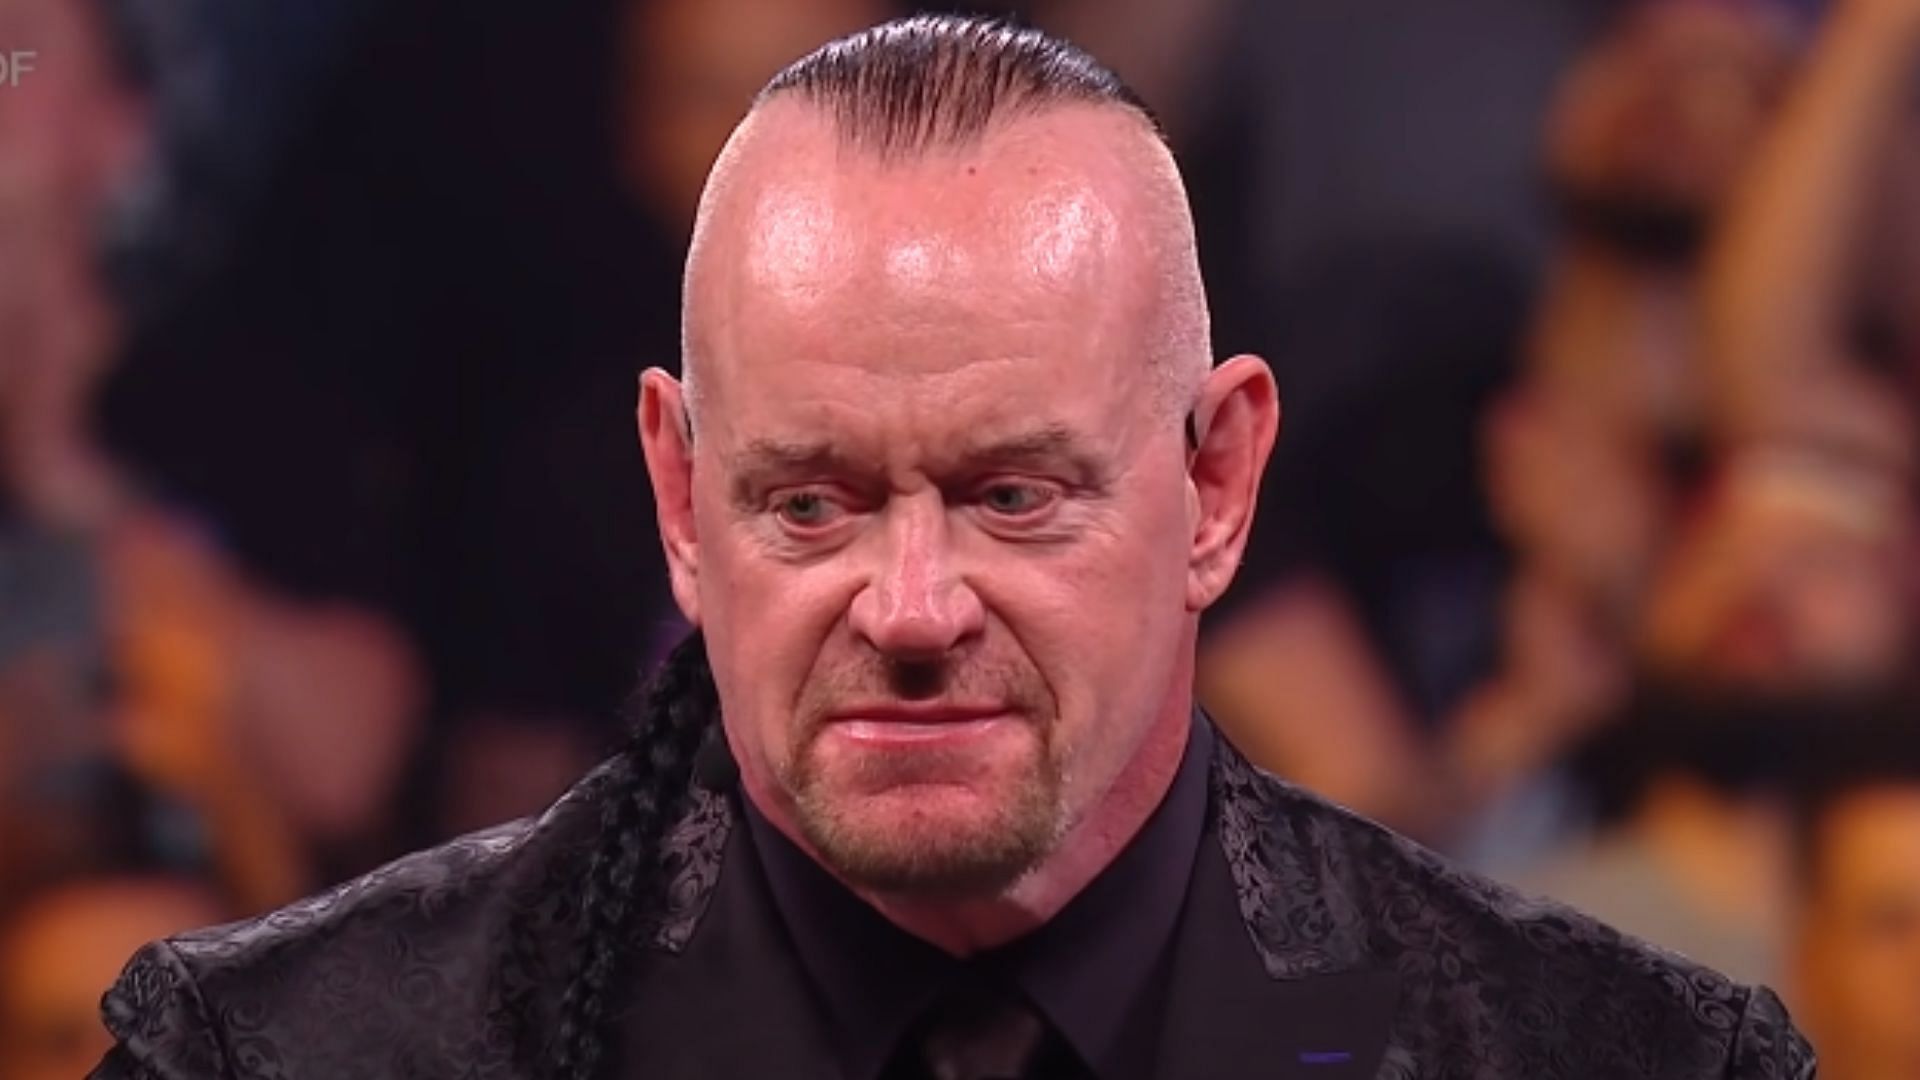 The Deadman is now a WWE Hall of Famer.